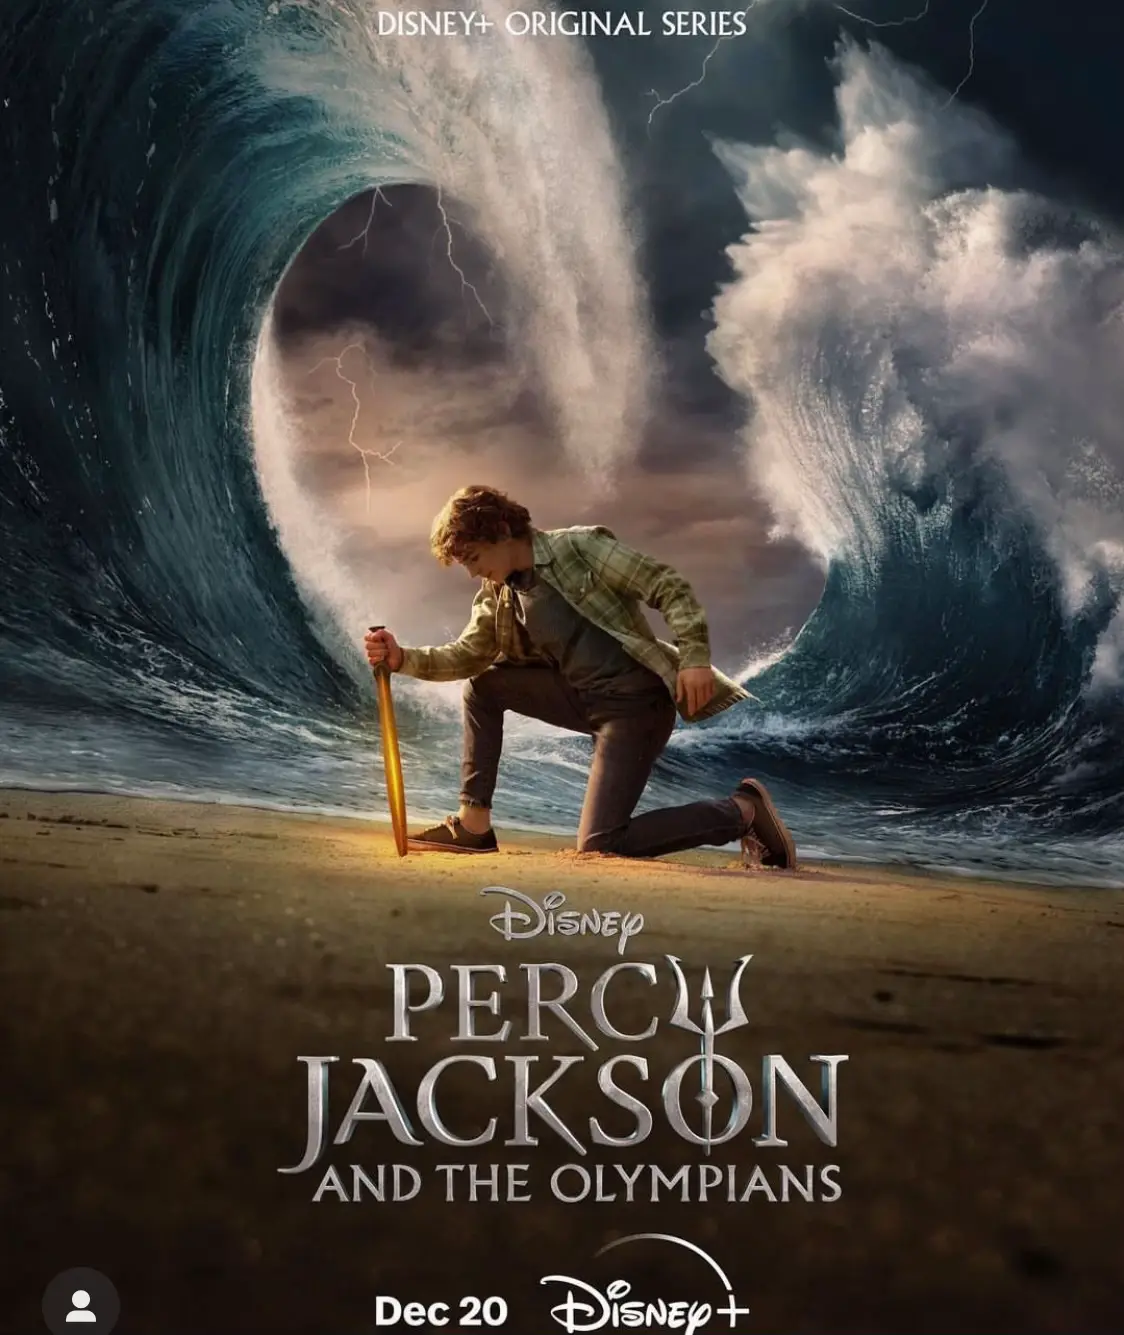 Percy Jackson Updates 🌊 on X: Camp Half-Blood Cabins in 'PERCY JACKSON  AND THE OLYMPIANS'  / X